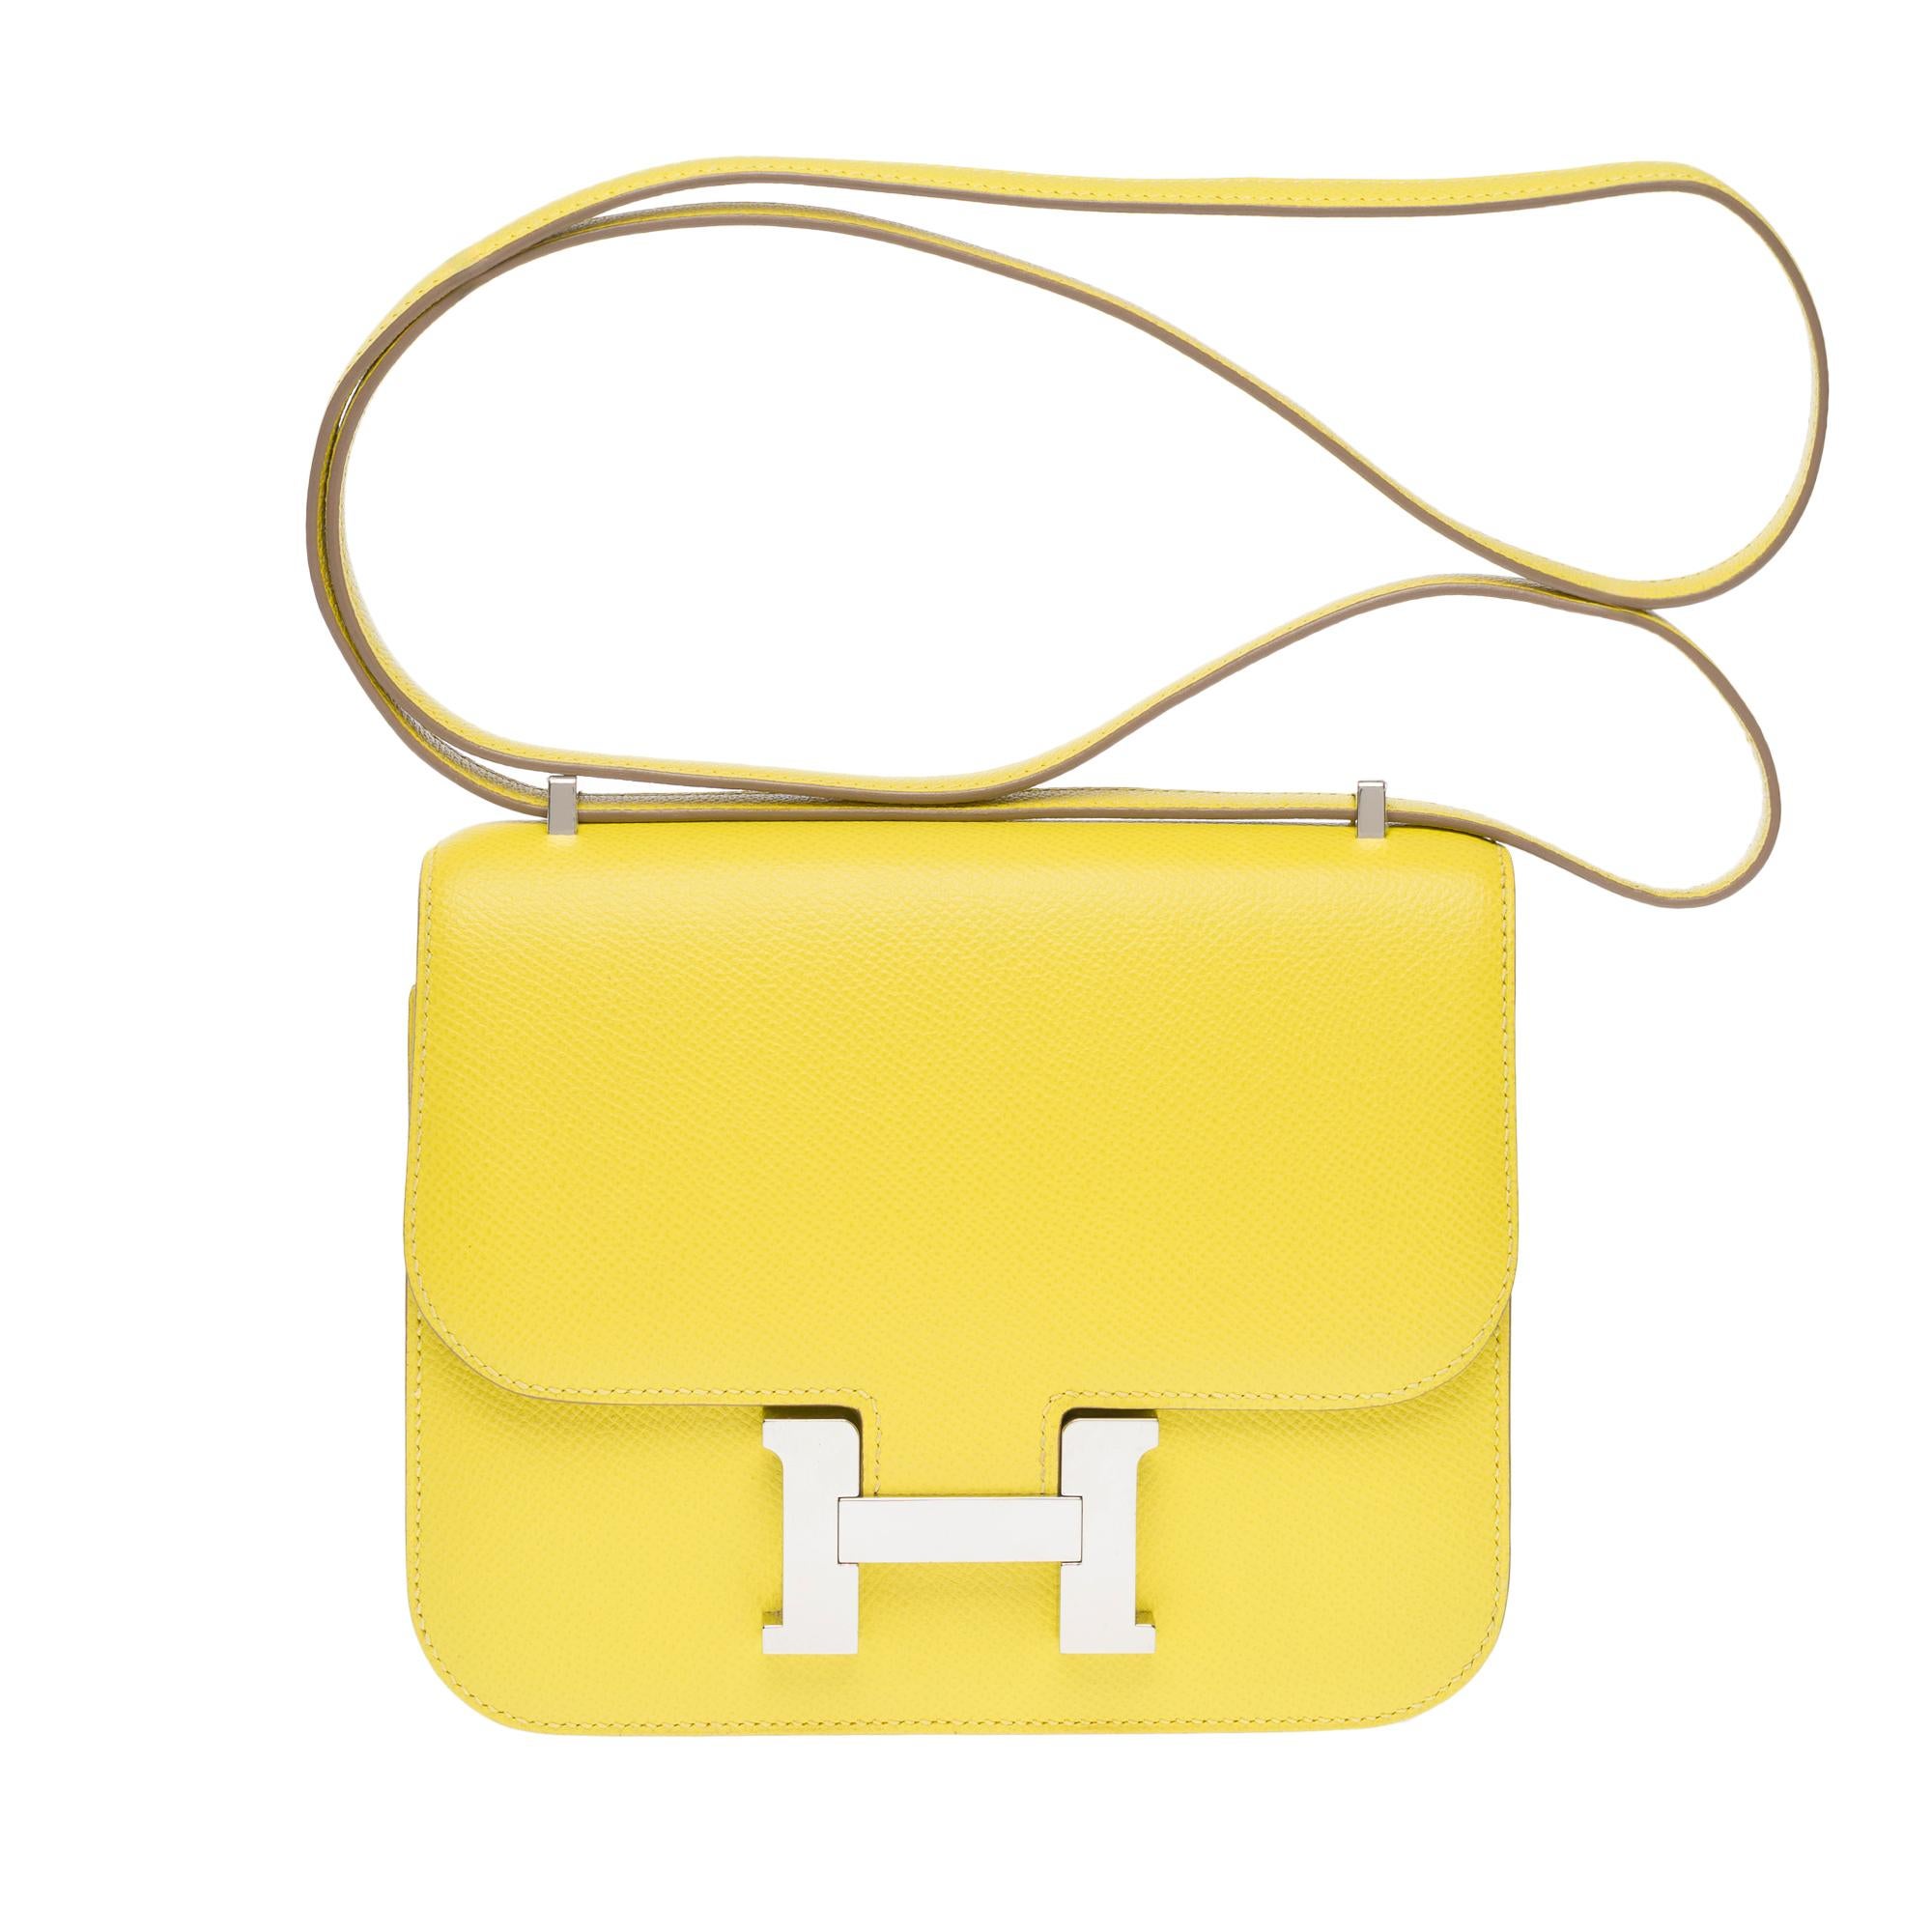 Stunning & luminous Hermès Constance Mini 18 in lime Epsom leather , palladium silver metal hardware, a shoulder strap in epsom leather for shoulder or crossbody carry

Logo closure on flap
Yellow leather lining, two compartments, two patch